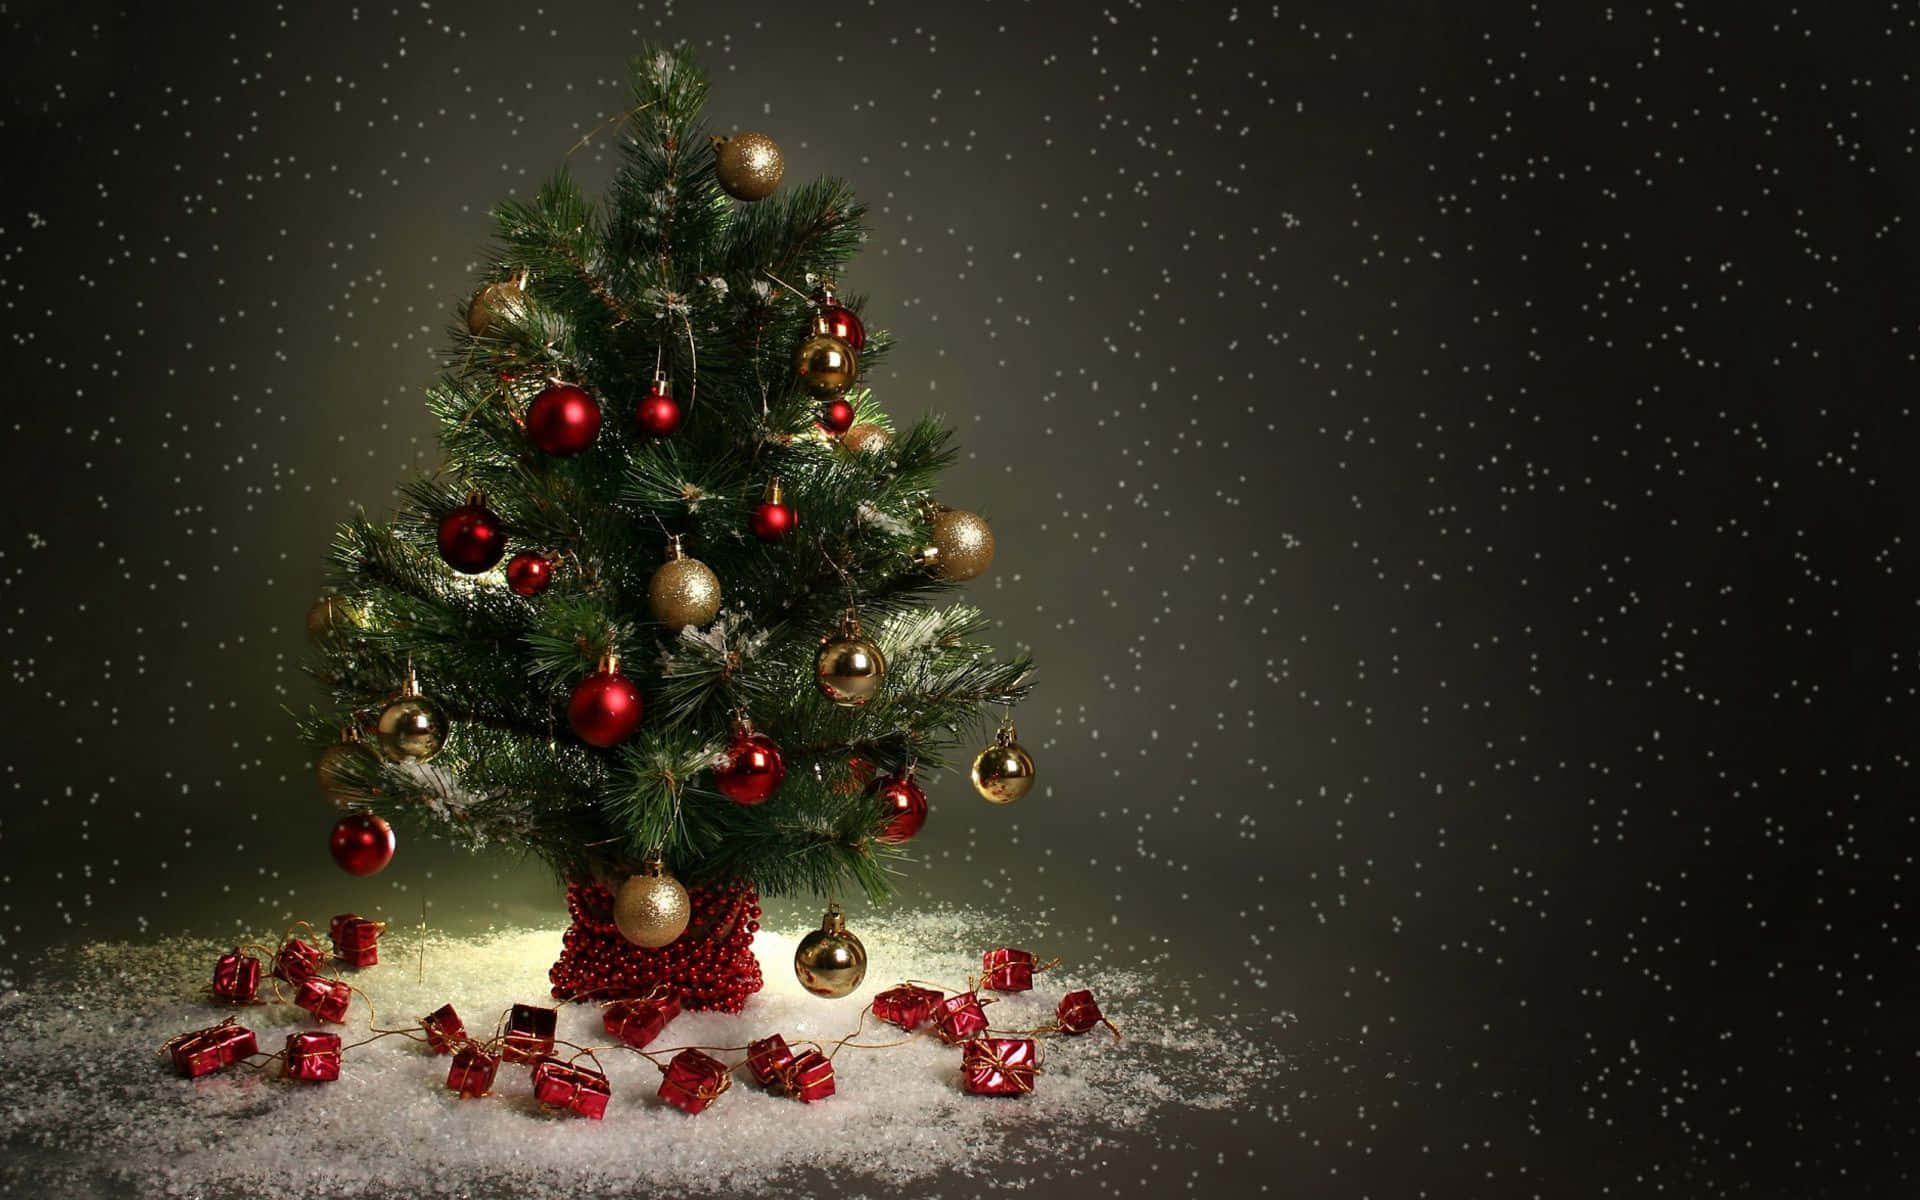 Download Christmas Tree With Gifts On A Dark Background | Wallpapers.com